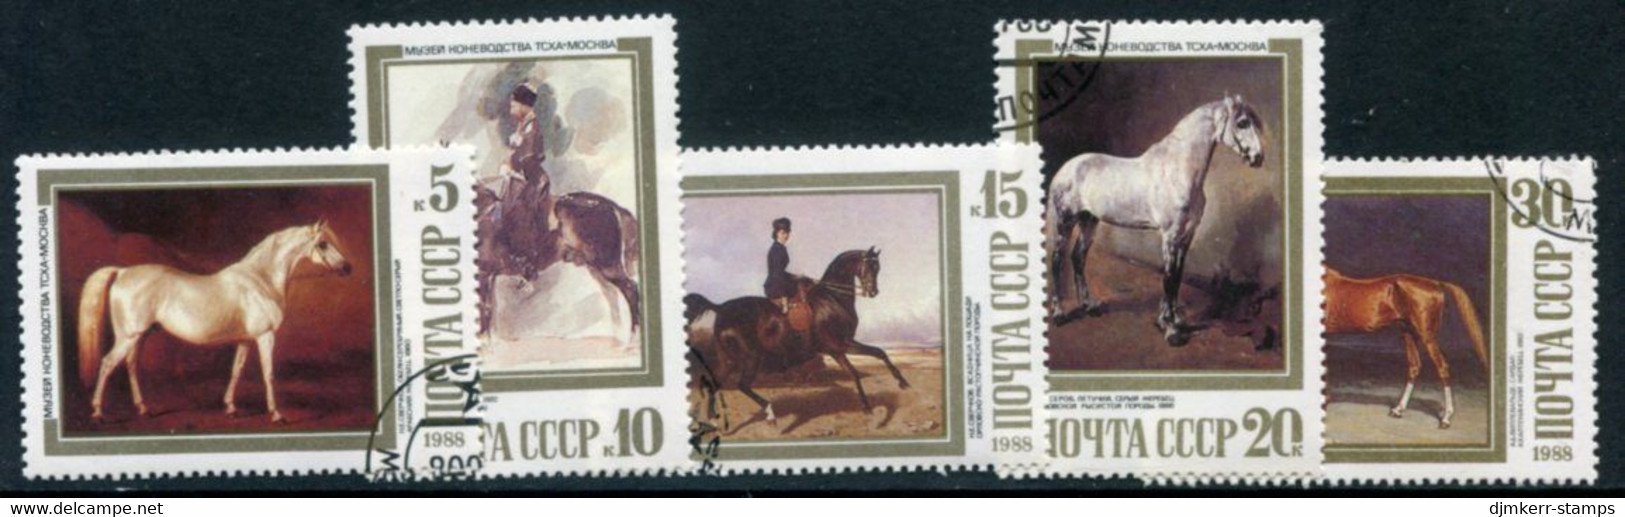 SOVIET UNION 1988 Equestrian Paintings Used     Michel 5854-58 - Used Stamps